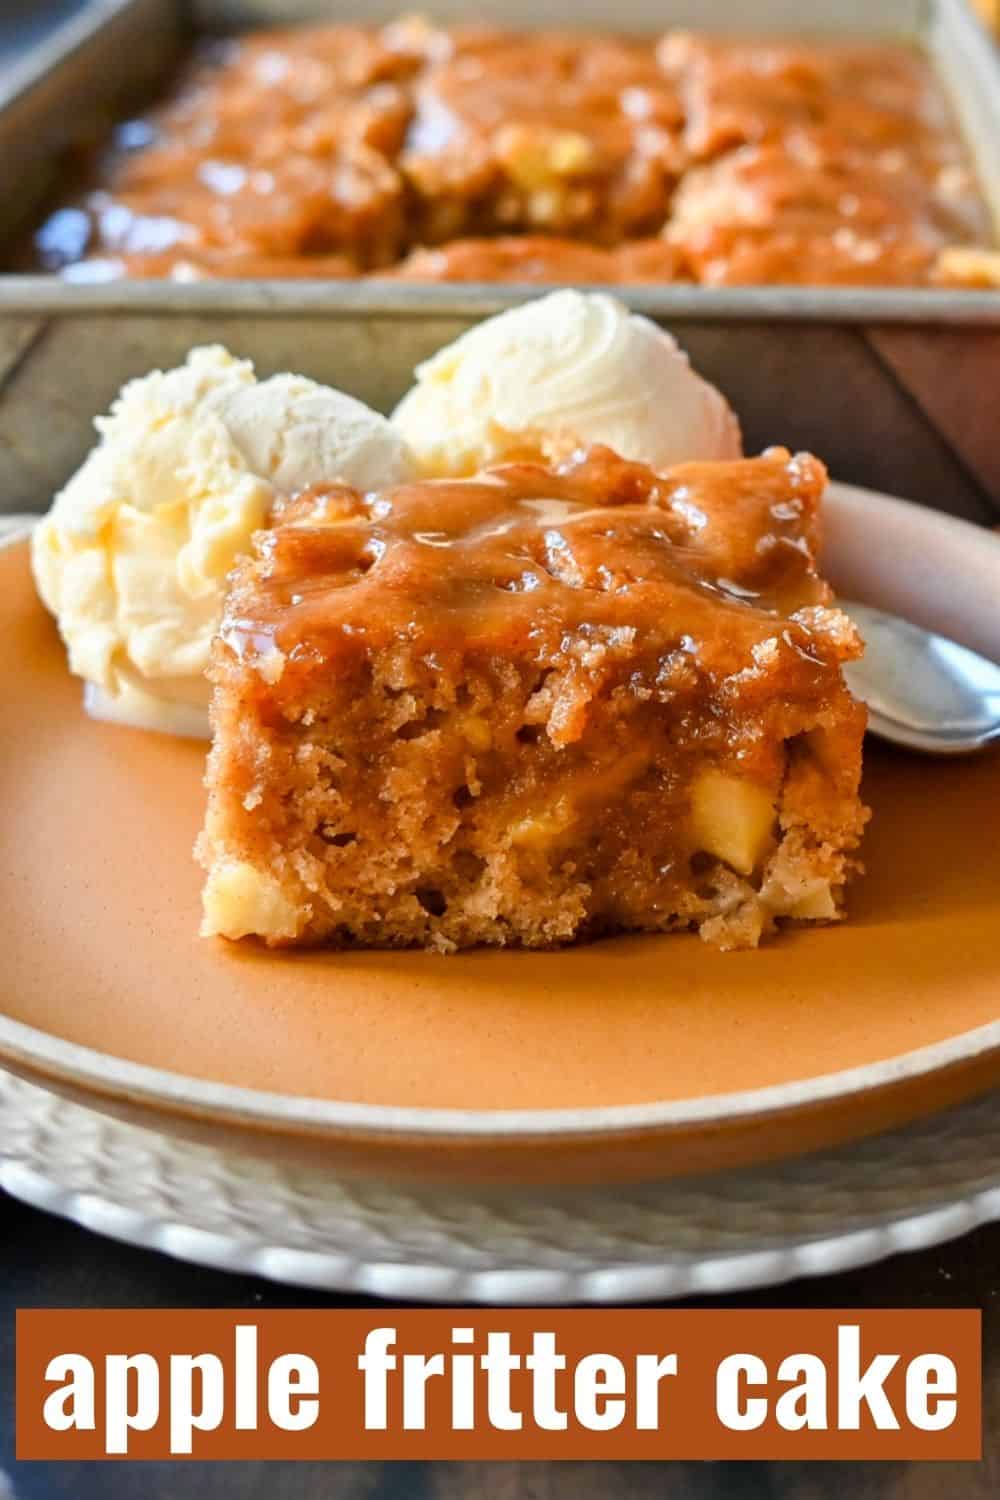 Apple Fritter Cake. Moist homemade apple fritter cake made with fresh apples with a brown sugar glaze. This is the best apple cake recipe and a perfect Fall dessert.